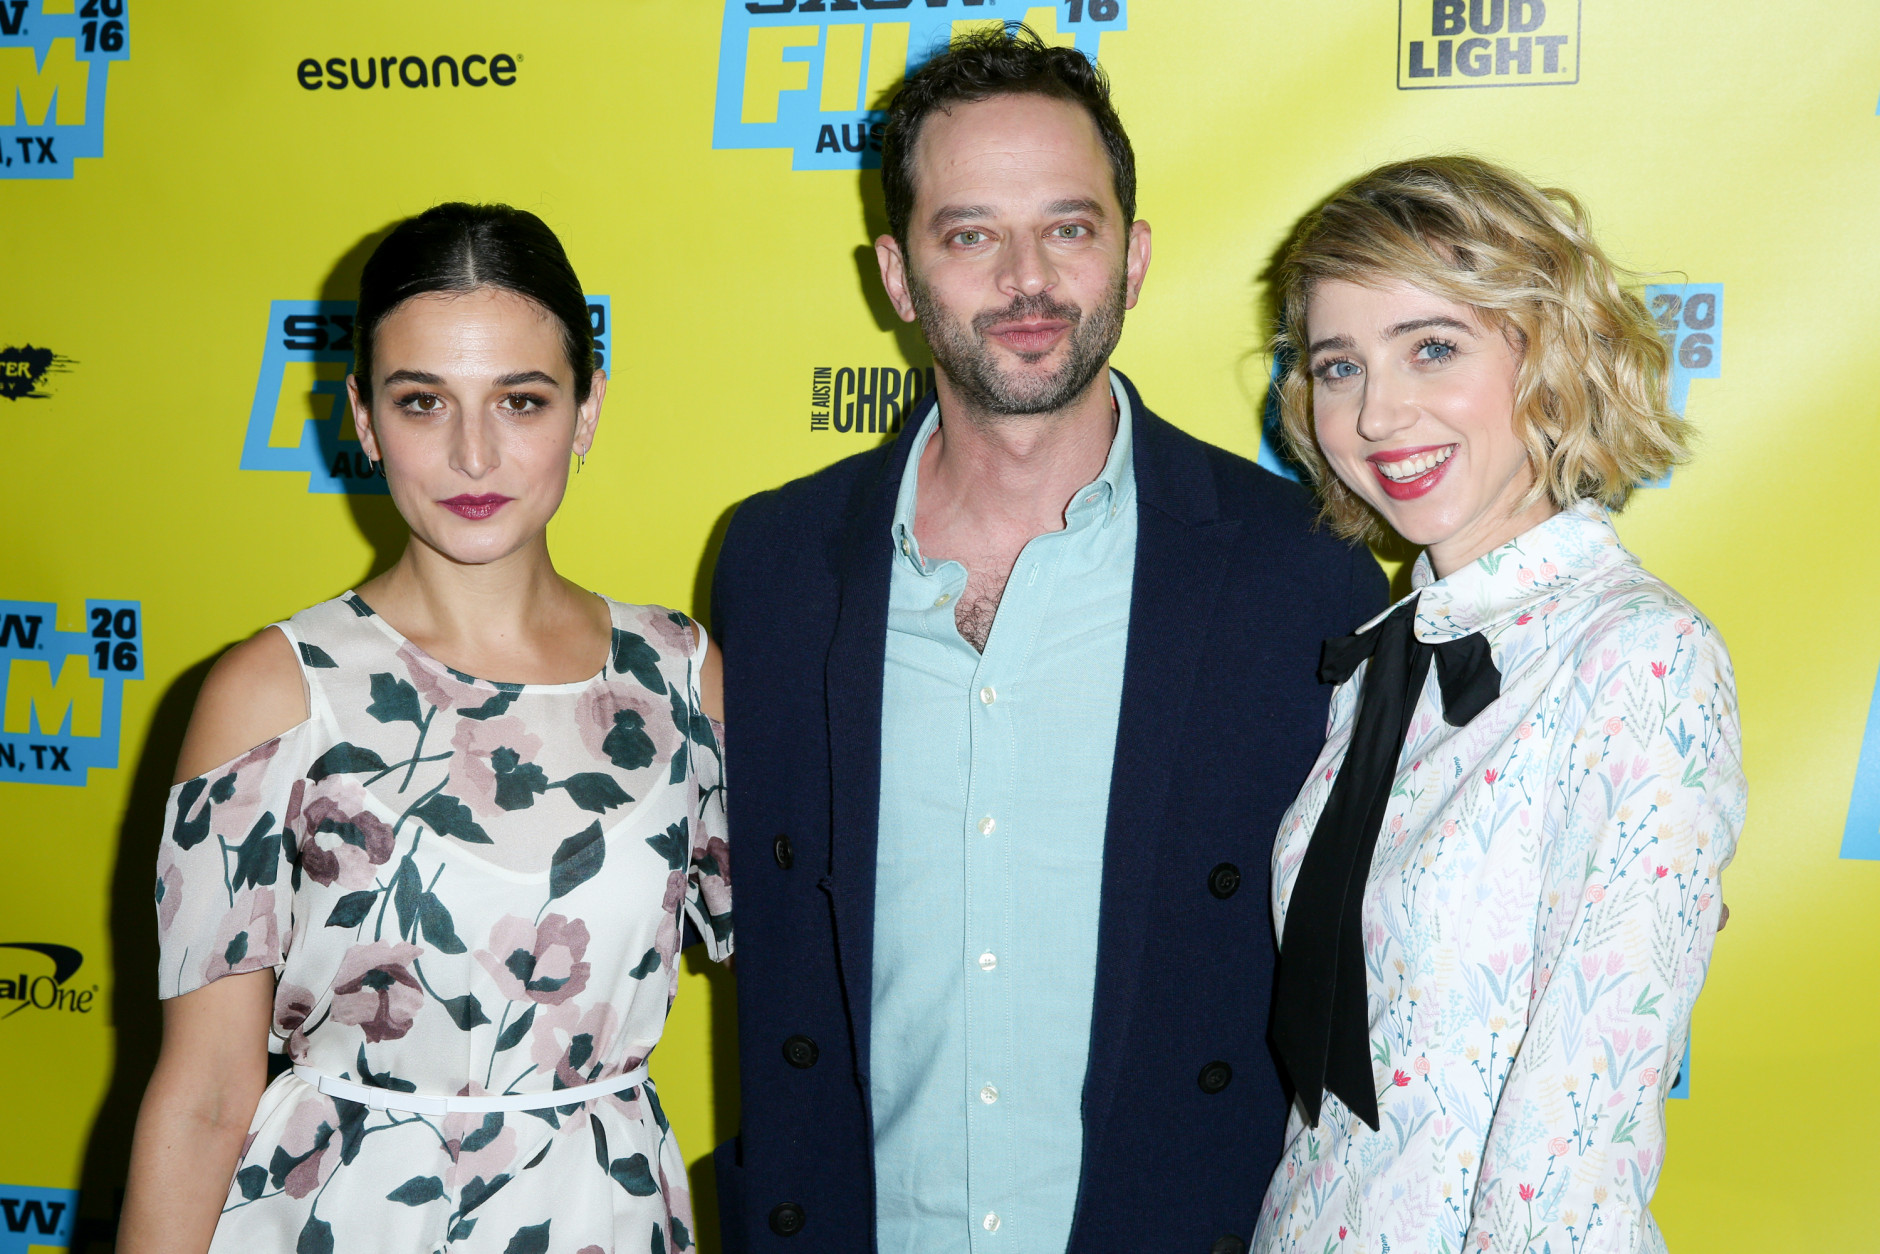 Jenny Slate, from left, Nick Kroll and Zoe Kazan arrive at the screening of "My Blind Brother" during South By Southwest at the Topfer Theatre on Saturday, March 12, 2016, in Austin, Texas. (Photo by Rich Fury/Invision/AP